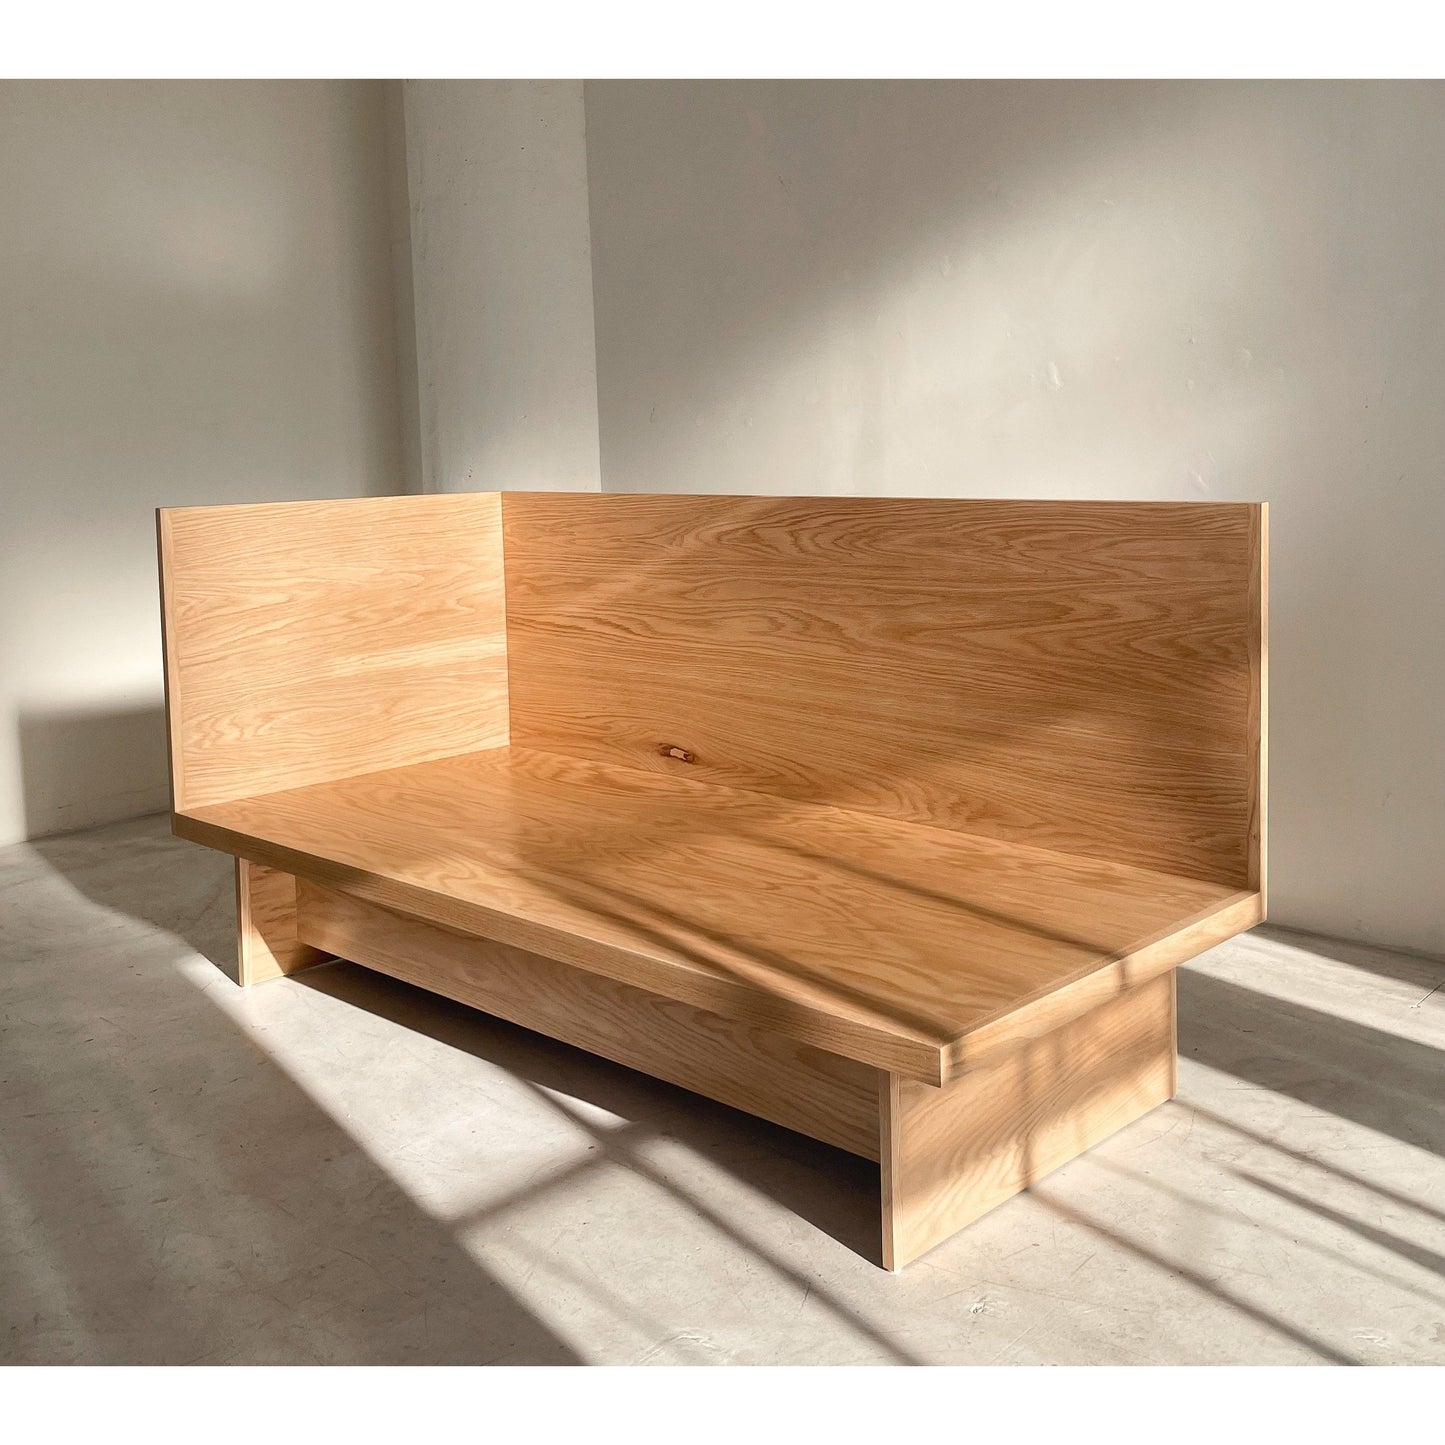 L-Shaped Couch | Twin Bed | Solid Oak | Modern Minimalist Wood Daybed LA | Handcrafted wooden daybed